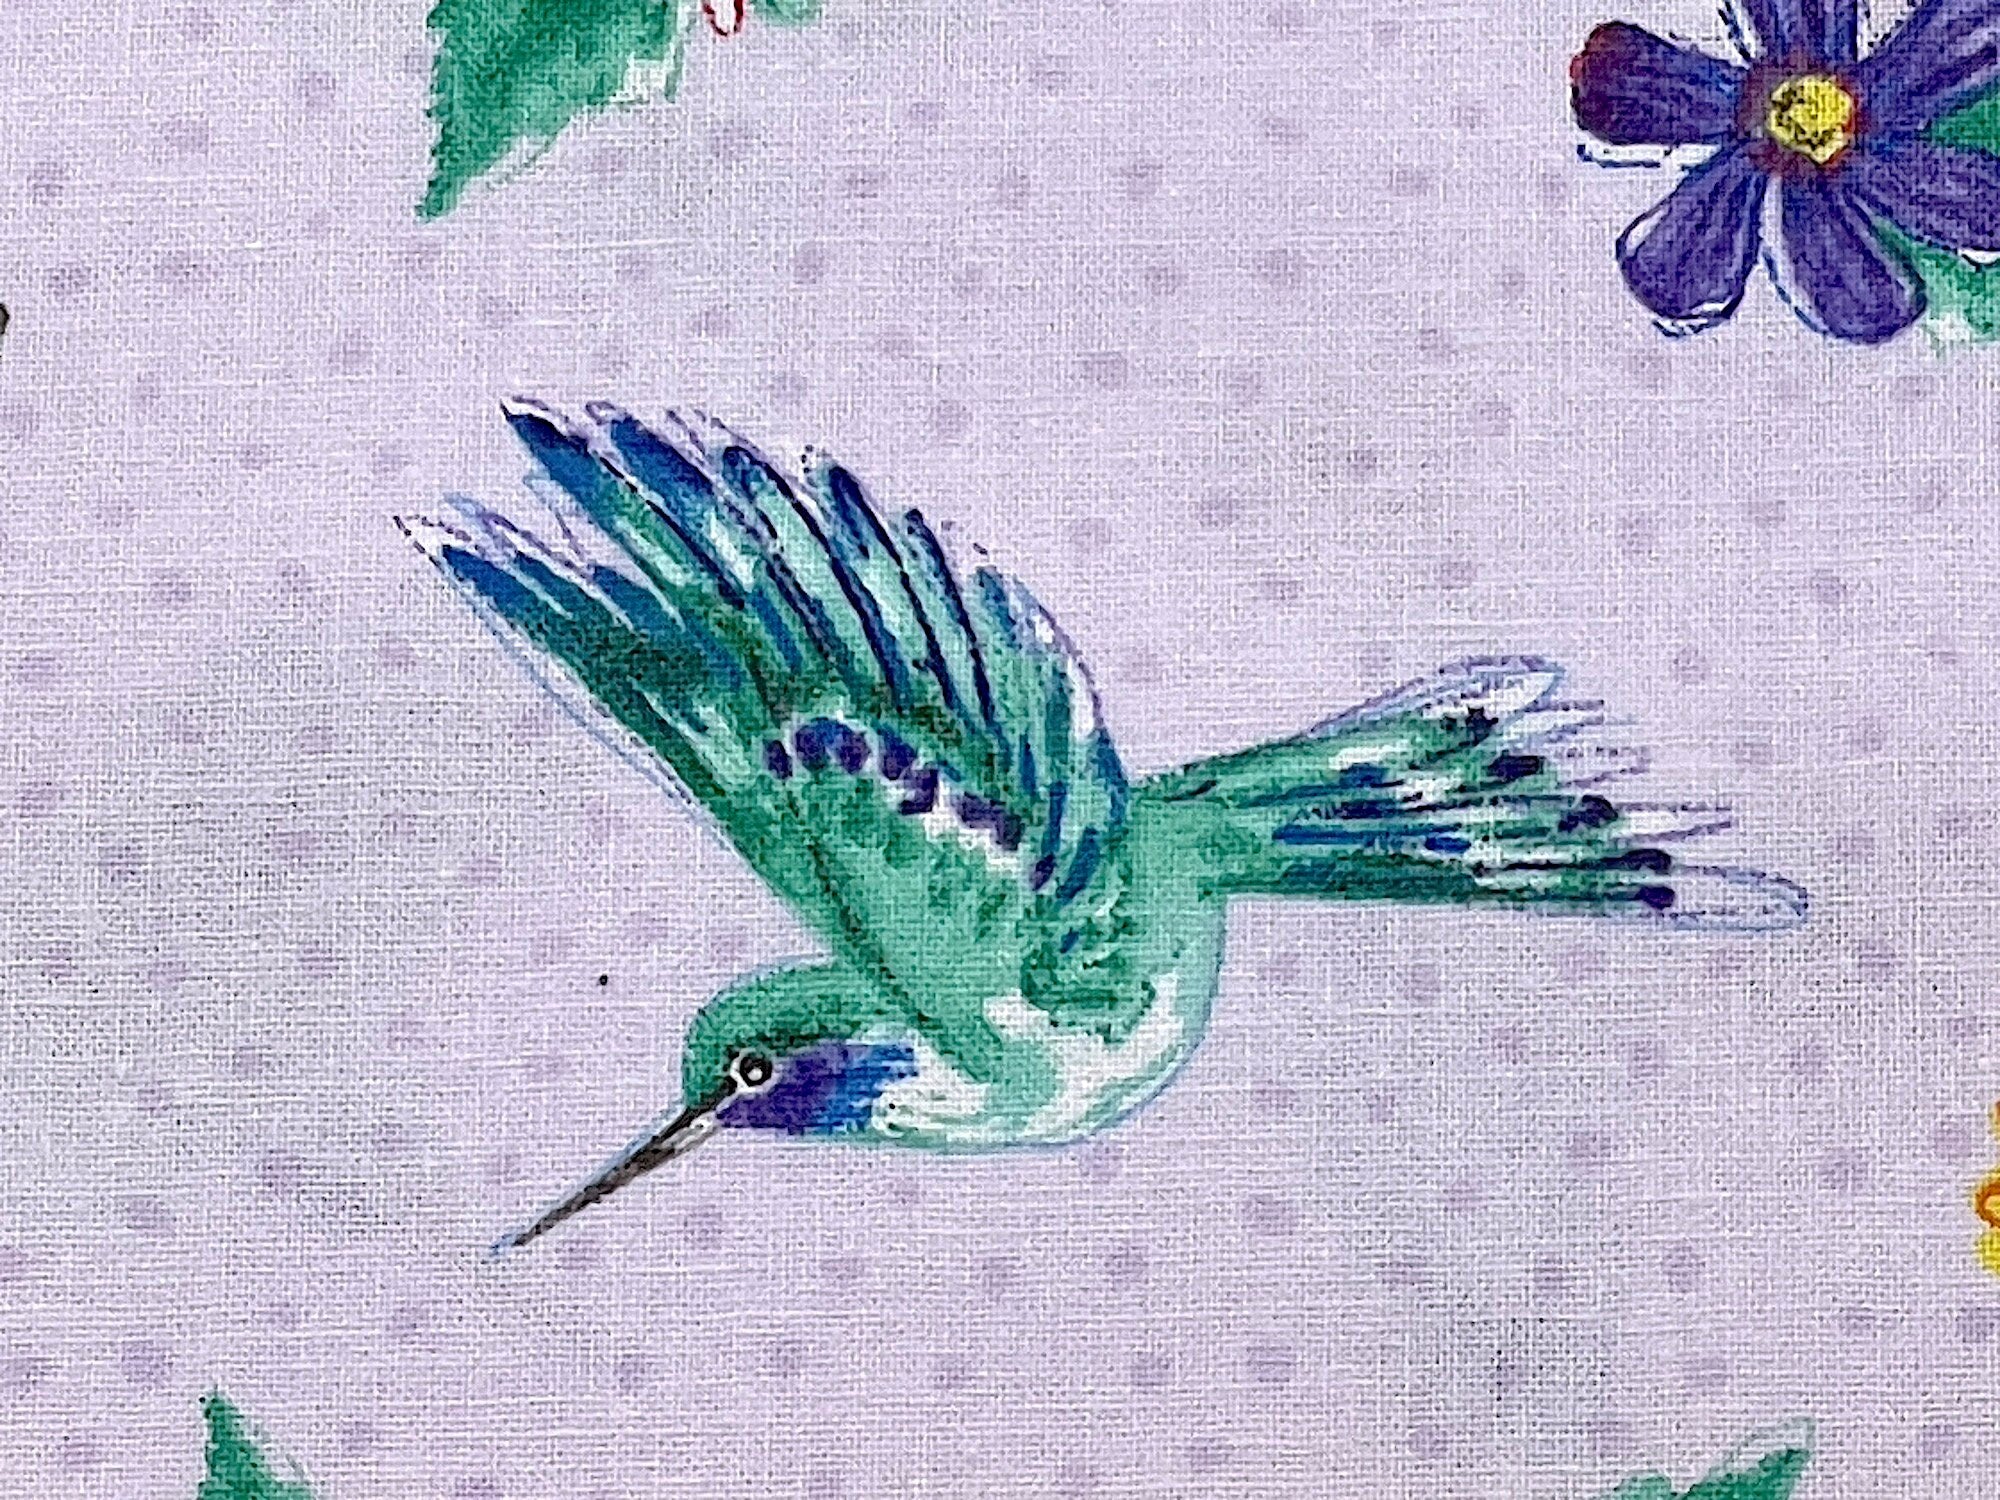 Close up of a bird that has shades of green, blue and white.